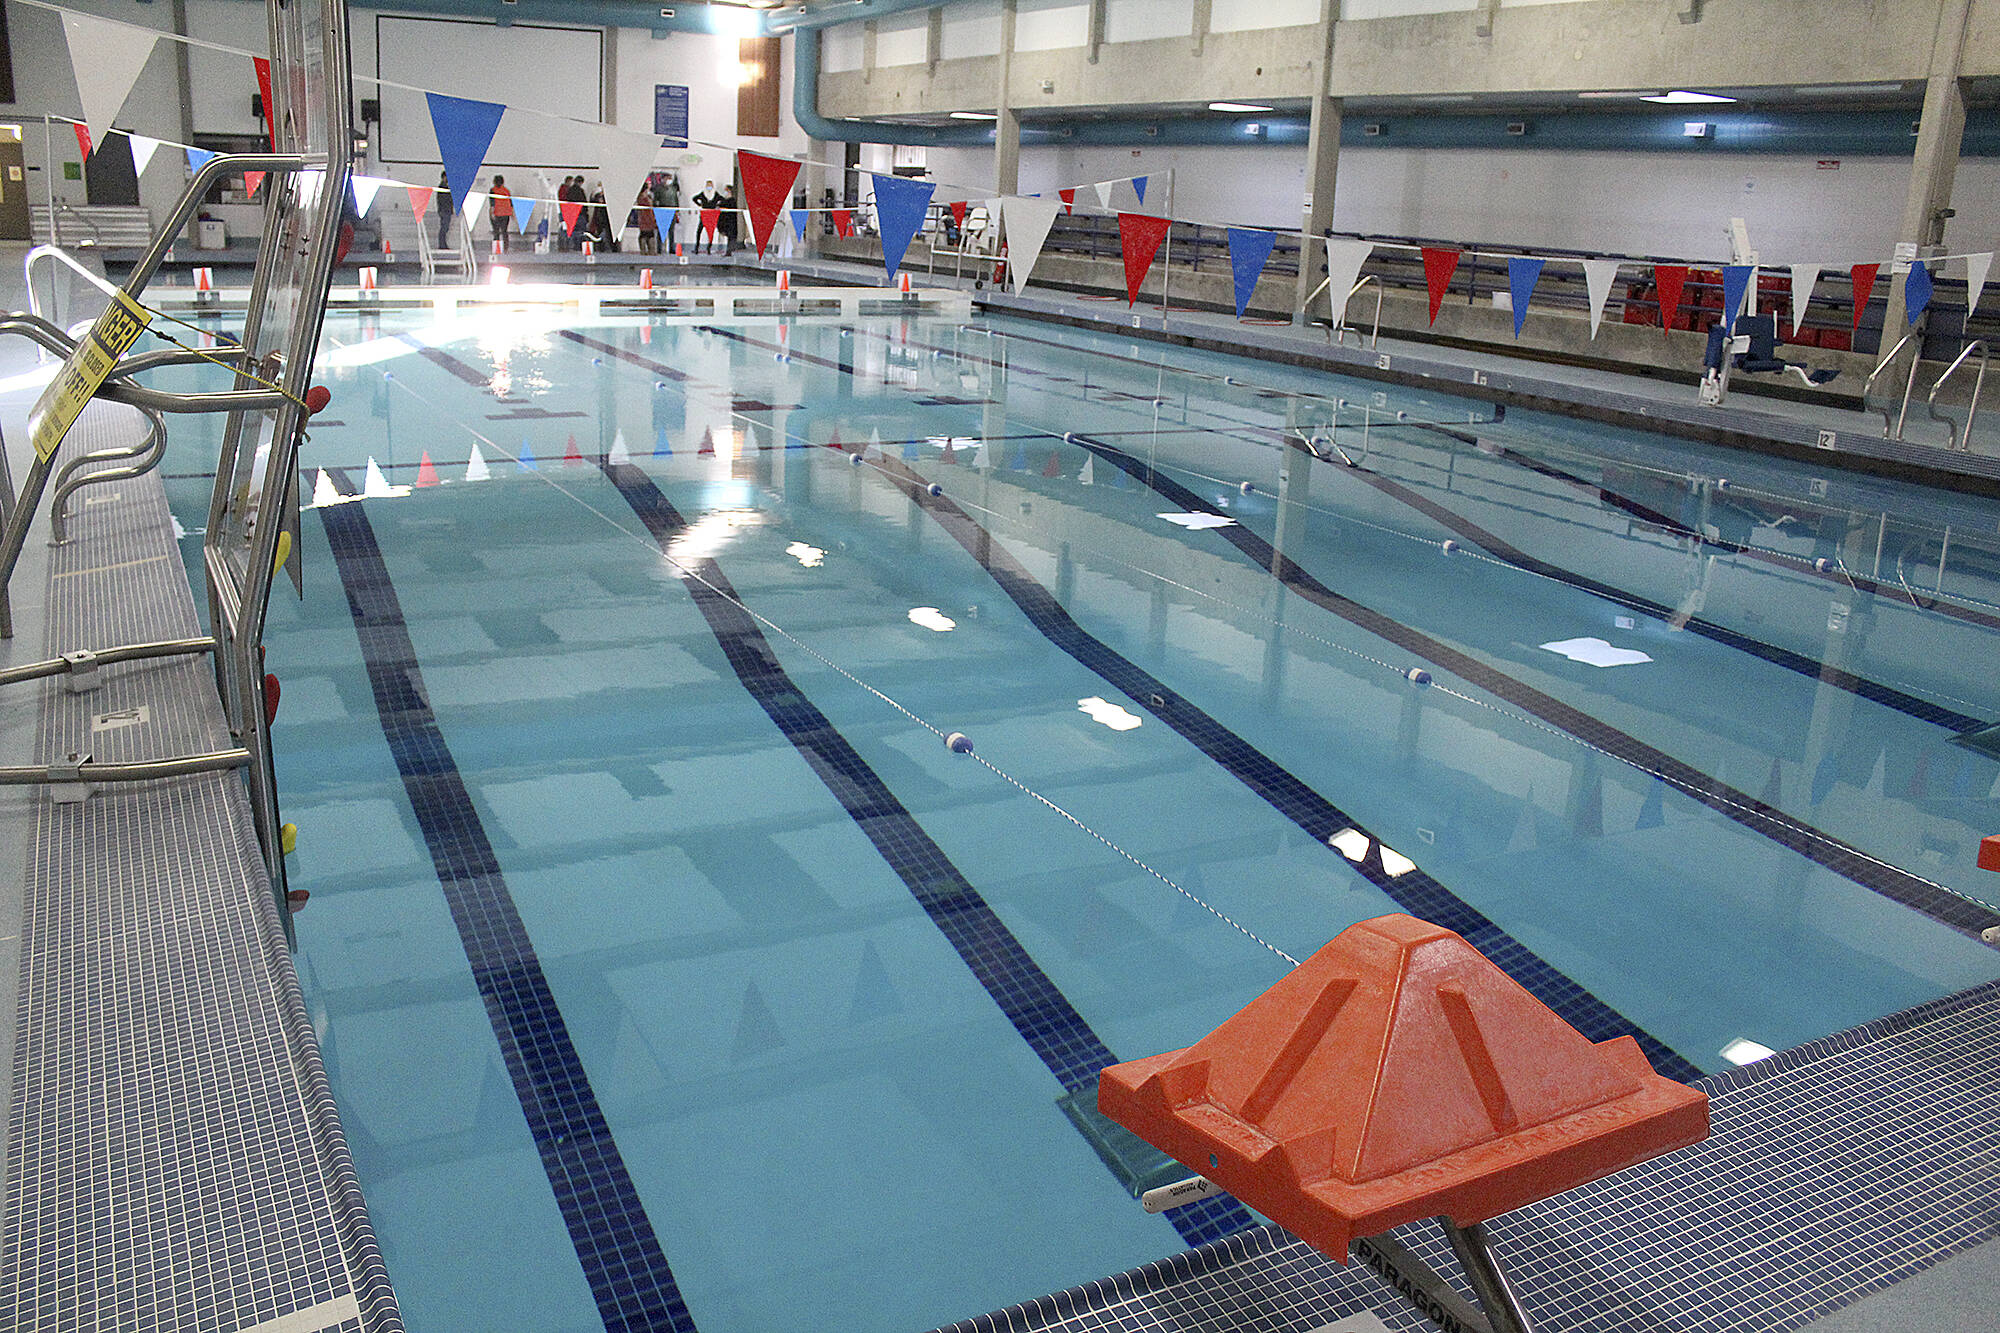 The Enumclaw pool. Photo by Ray Miller-Still